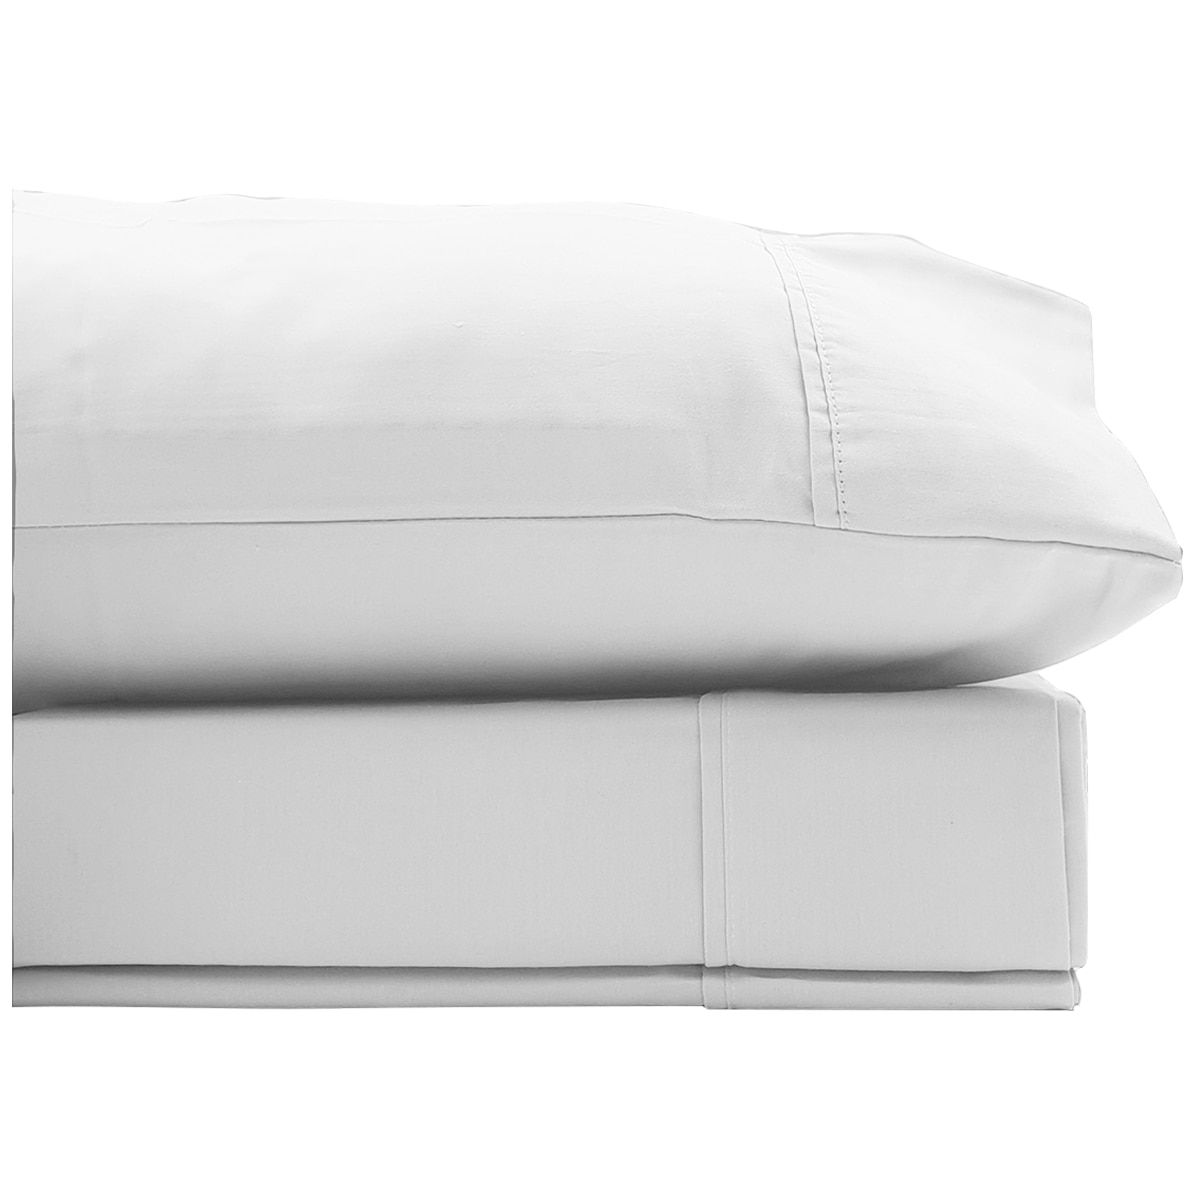 Bdirect Renee Taylor 1500 Thread Count Cotton Blend Sheet Set - Queen - White